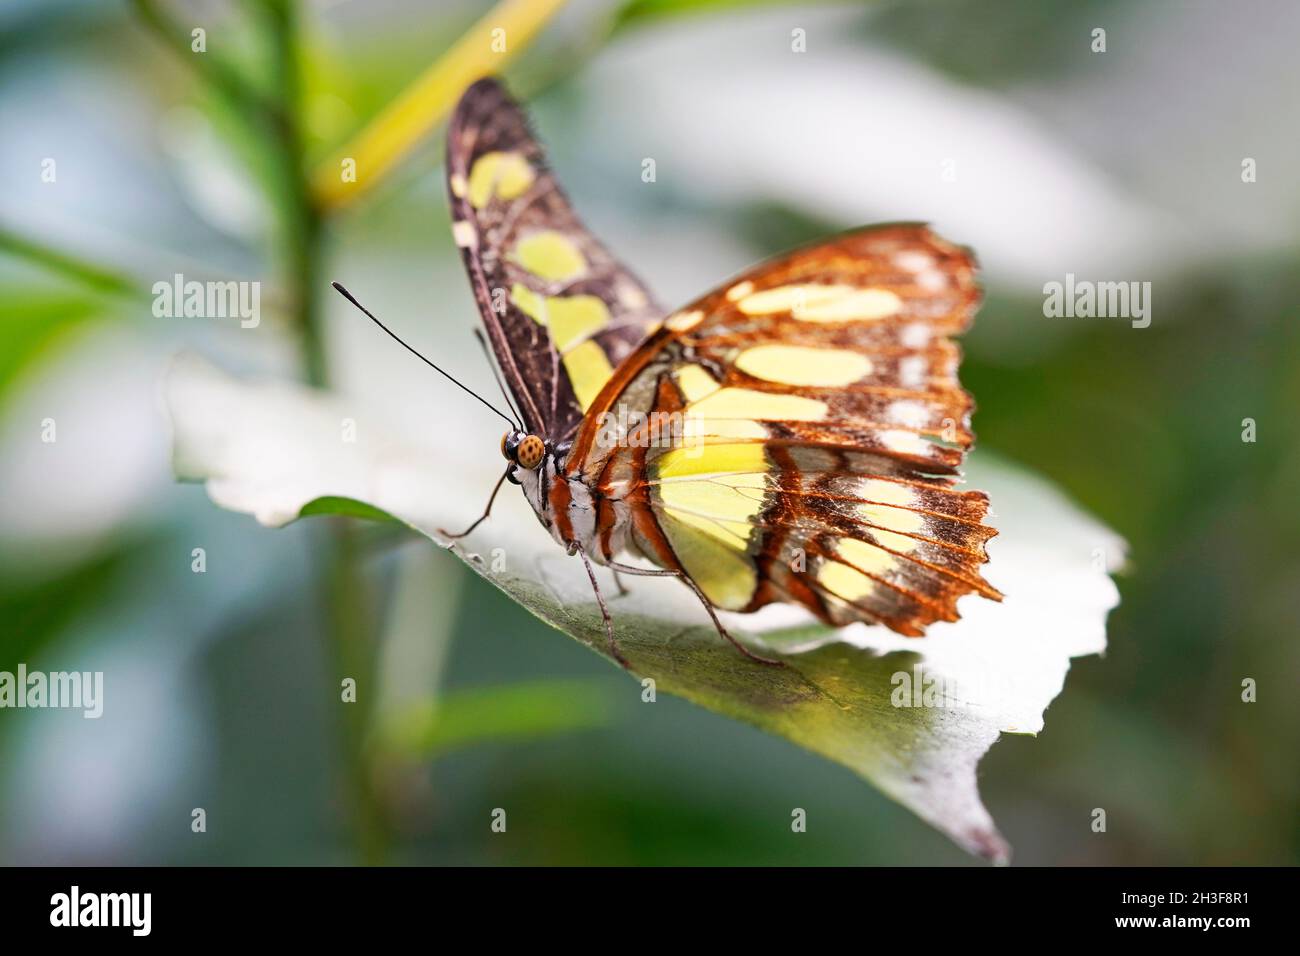 Malachite butterfly. Insect in a detailed close-up. Tropical butterfly. Rare butterfly species. Siproeta stelenes. Stock Photo